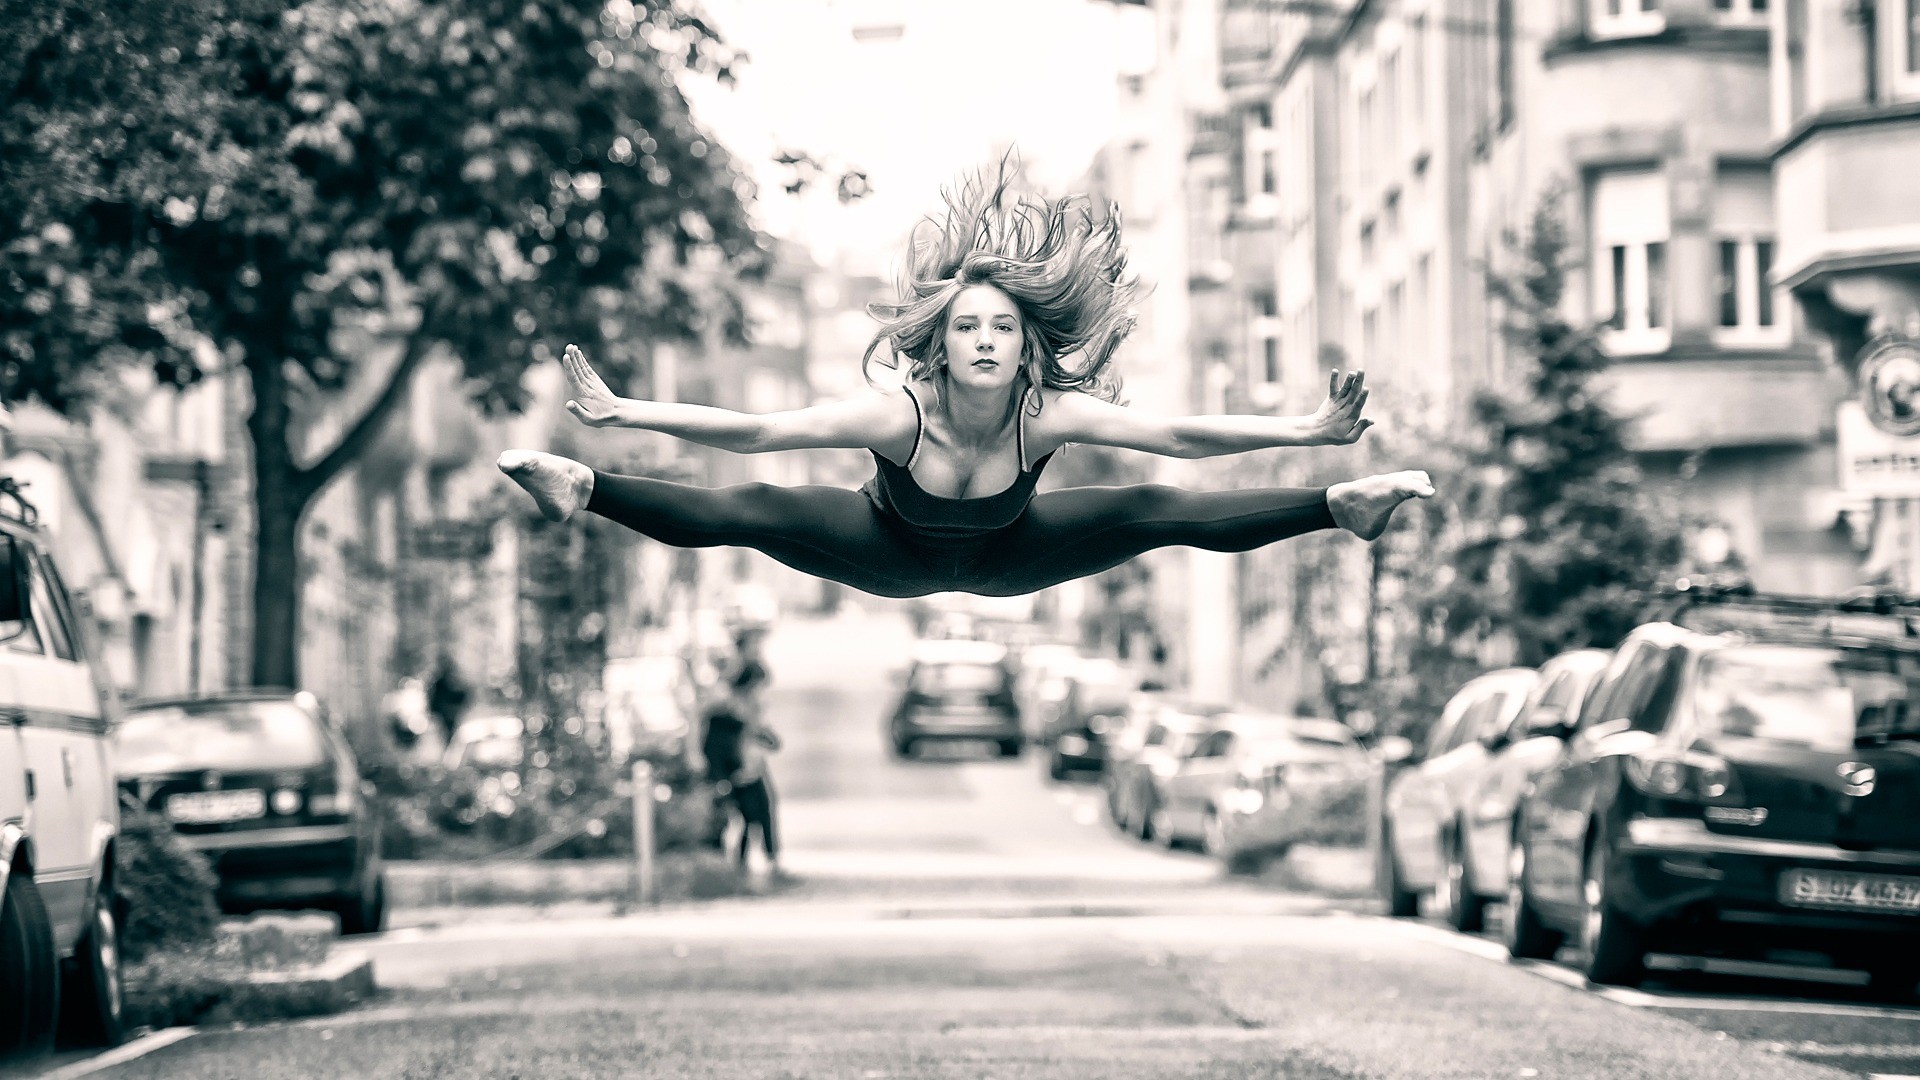 People 1920x1080 monochrome women dancer flexible splits women outdoors exercise spread legs urban looking at viewer street city cleavage long hair model barefoot pointed toes blonde